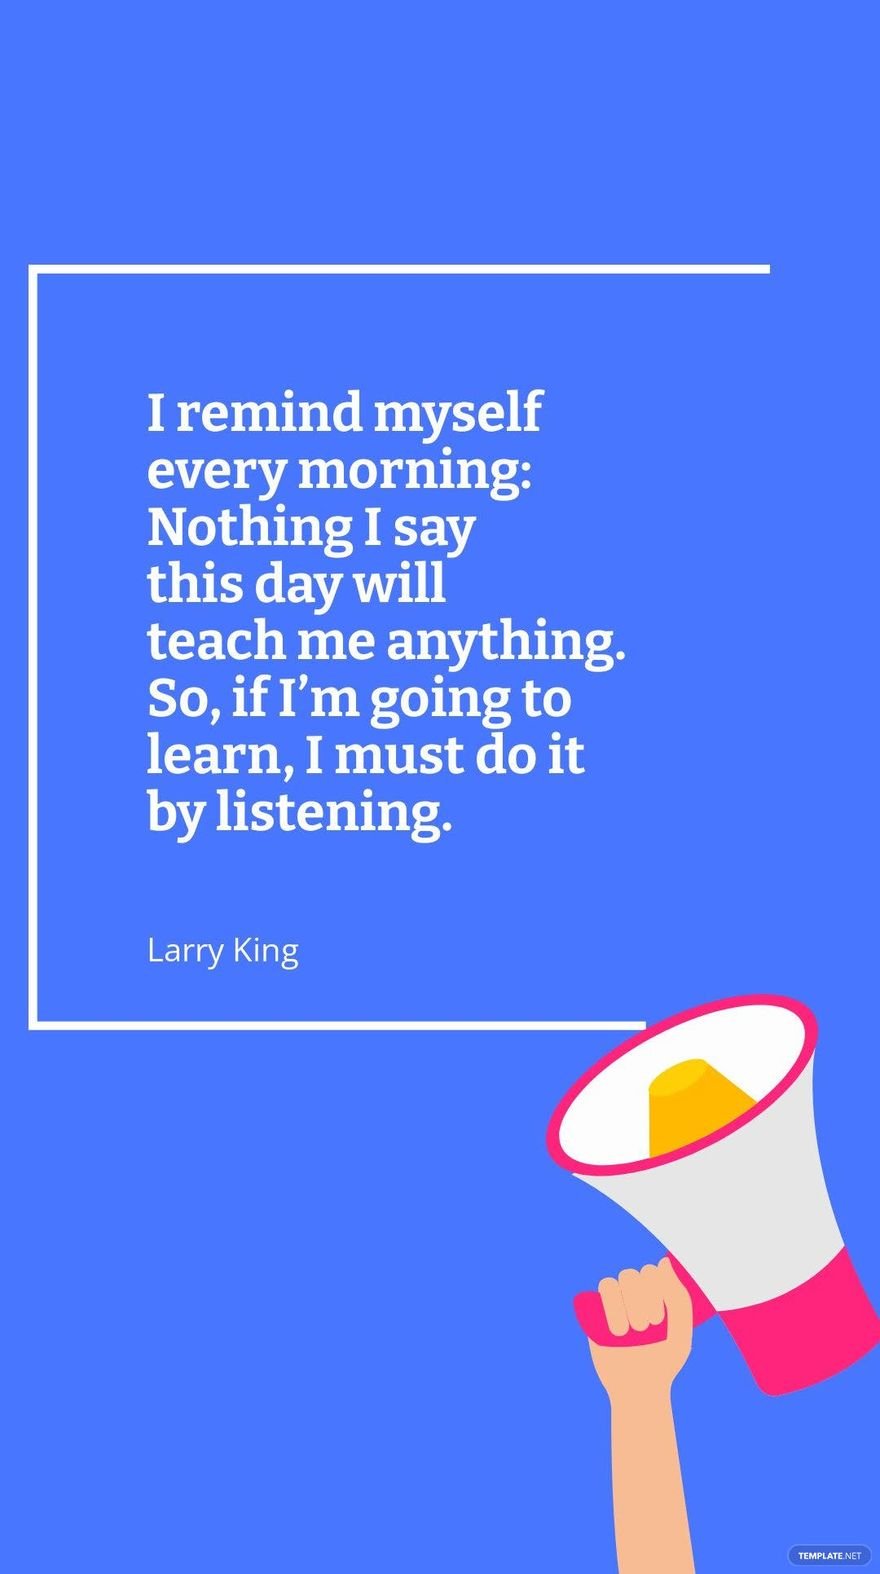 Larry King - I remind myself every morning: Nothing I say this day will teach me anything. So, if I’m going to learn, I must do it by listening.